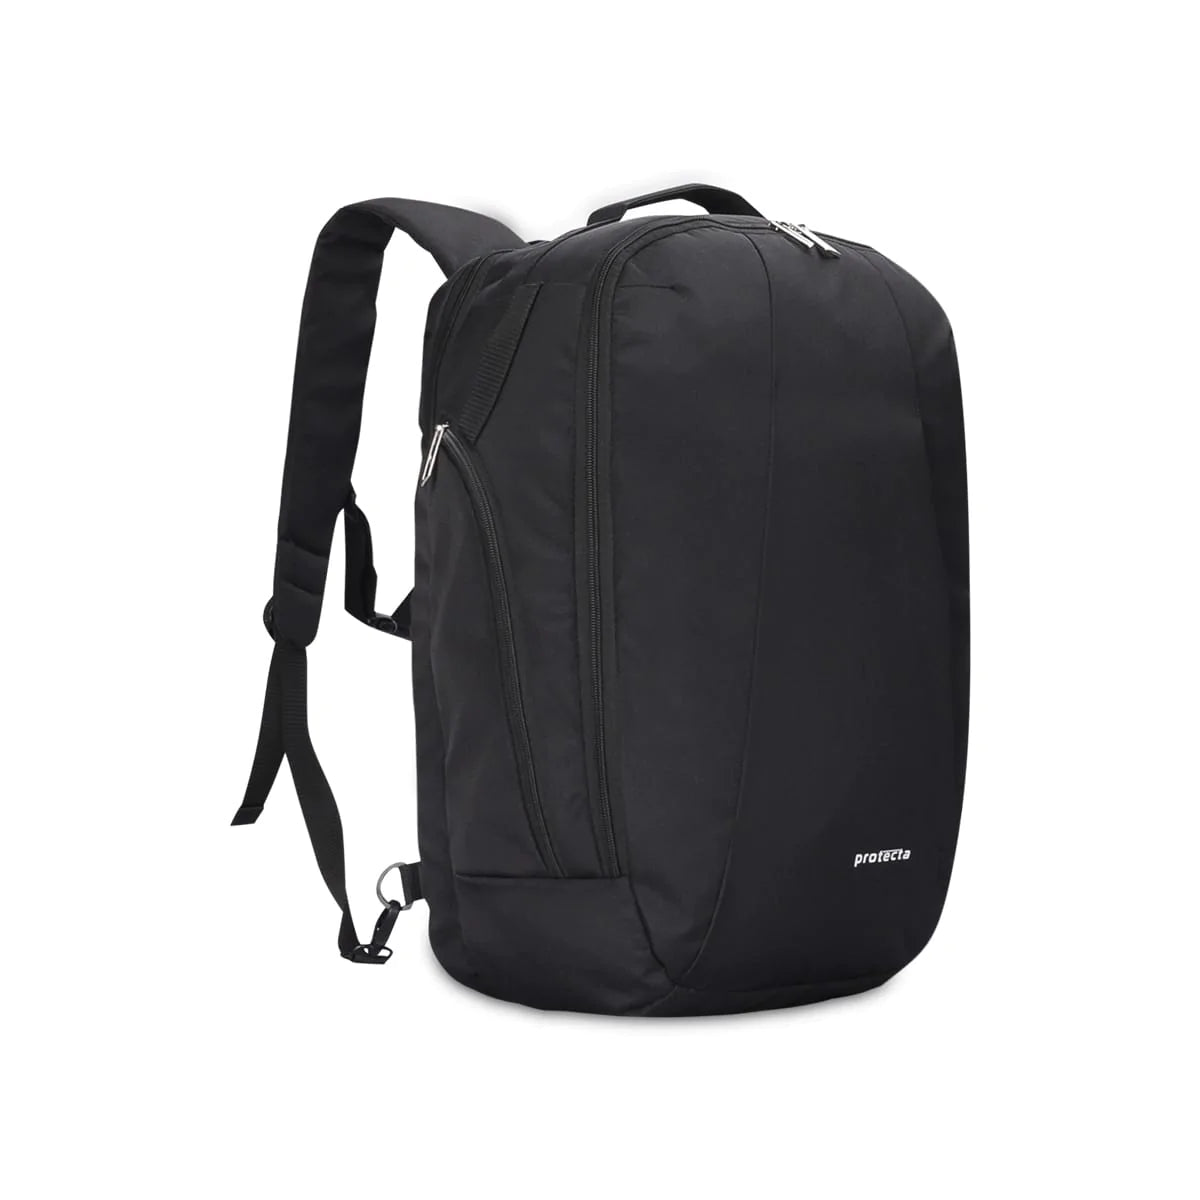 Black | Protecta Proposed Merger Convertible Office Trave Laptop Backpack-Main